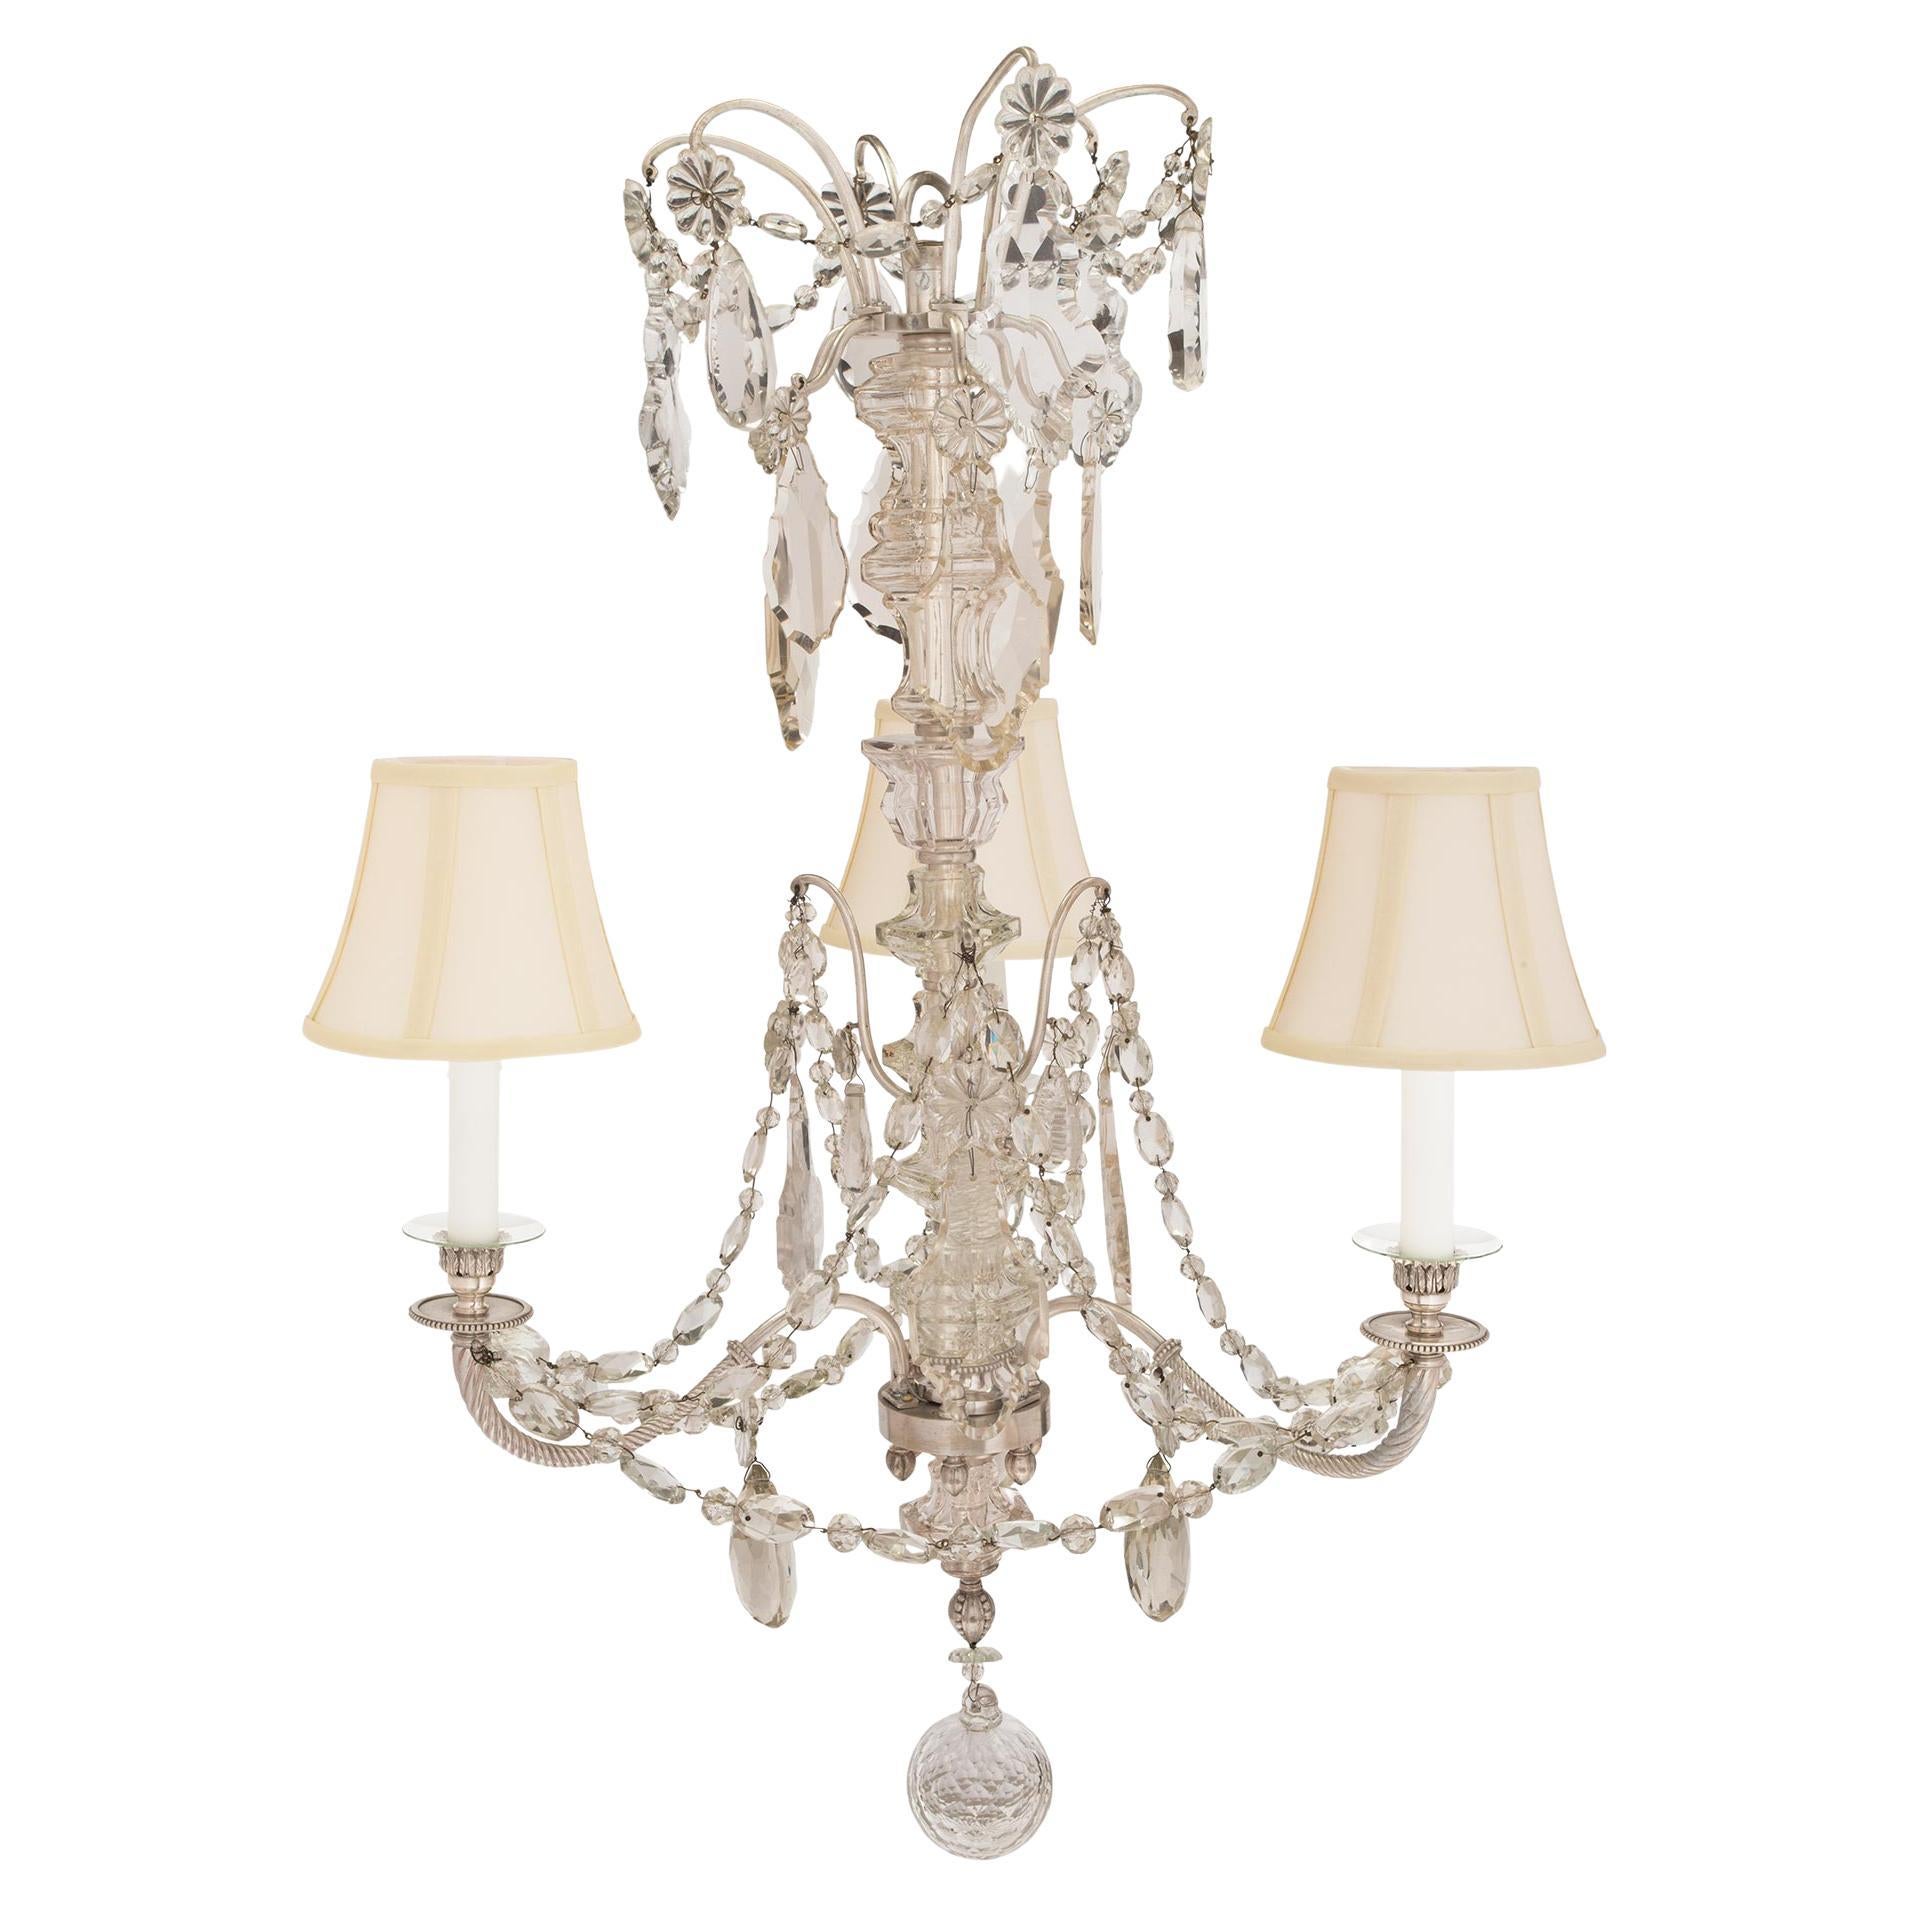 French Mid-19th Century Louis XVI Style Baccarat Crystal and Bronze Chandelier For Sale